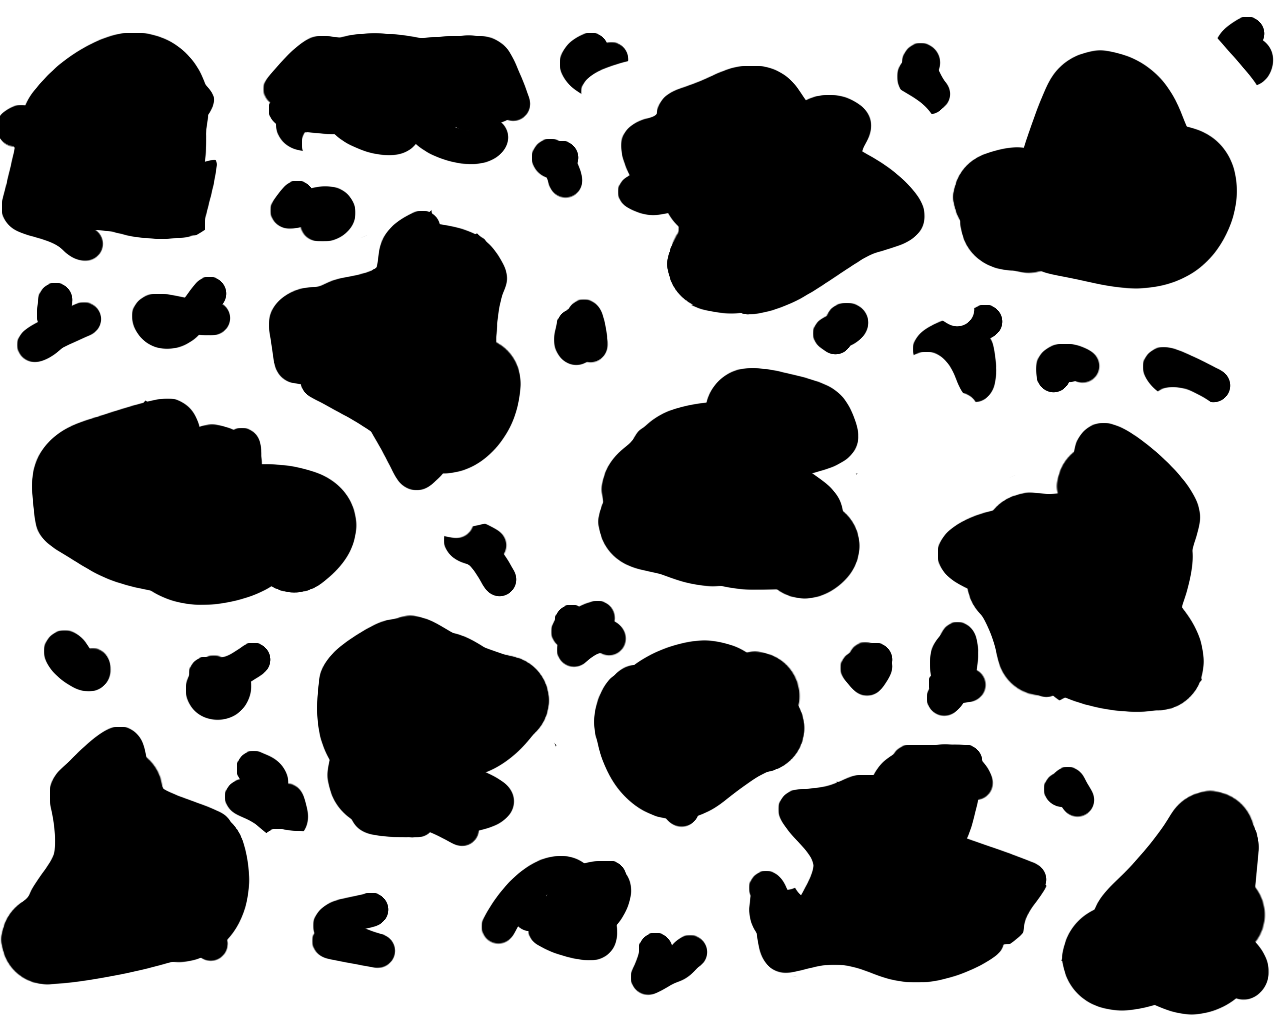 AMIYA Cow Print Peel and Stick Wallpaper 177 X 300 Black and White Dots  Contact Paper Cute Spots Removable Decorative Wallpaper for Living Room  Bedroom Nurseryls Vinyl   Amazoncom